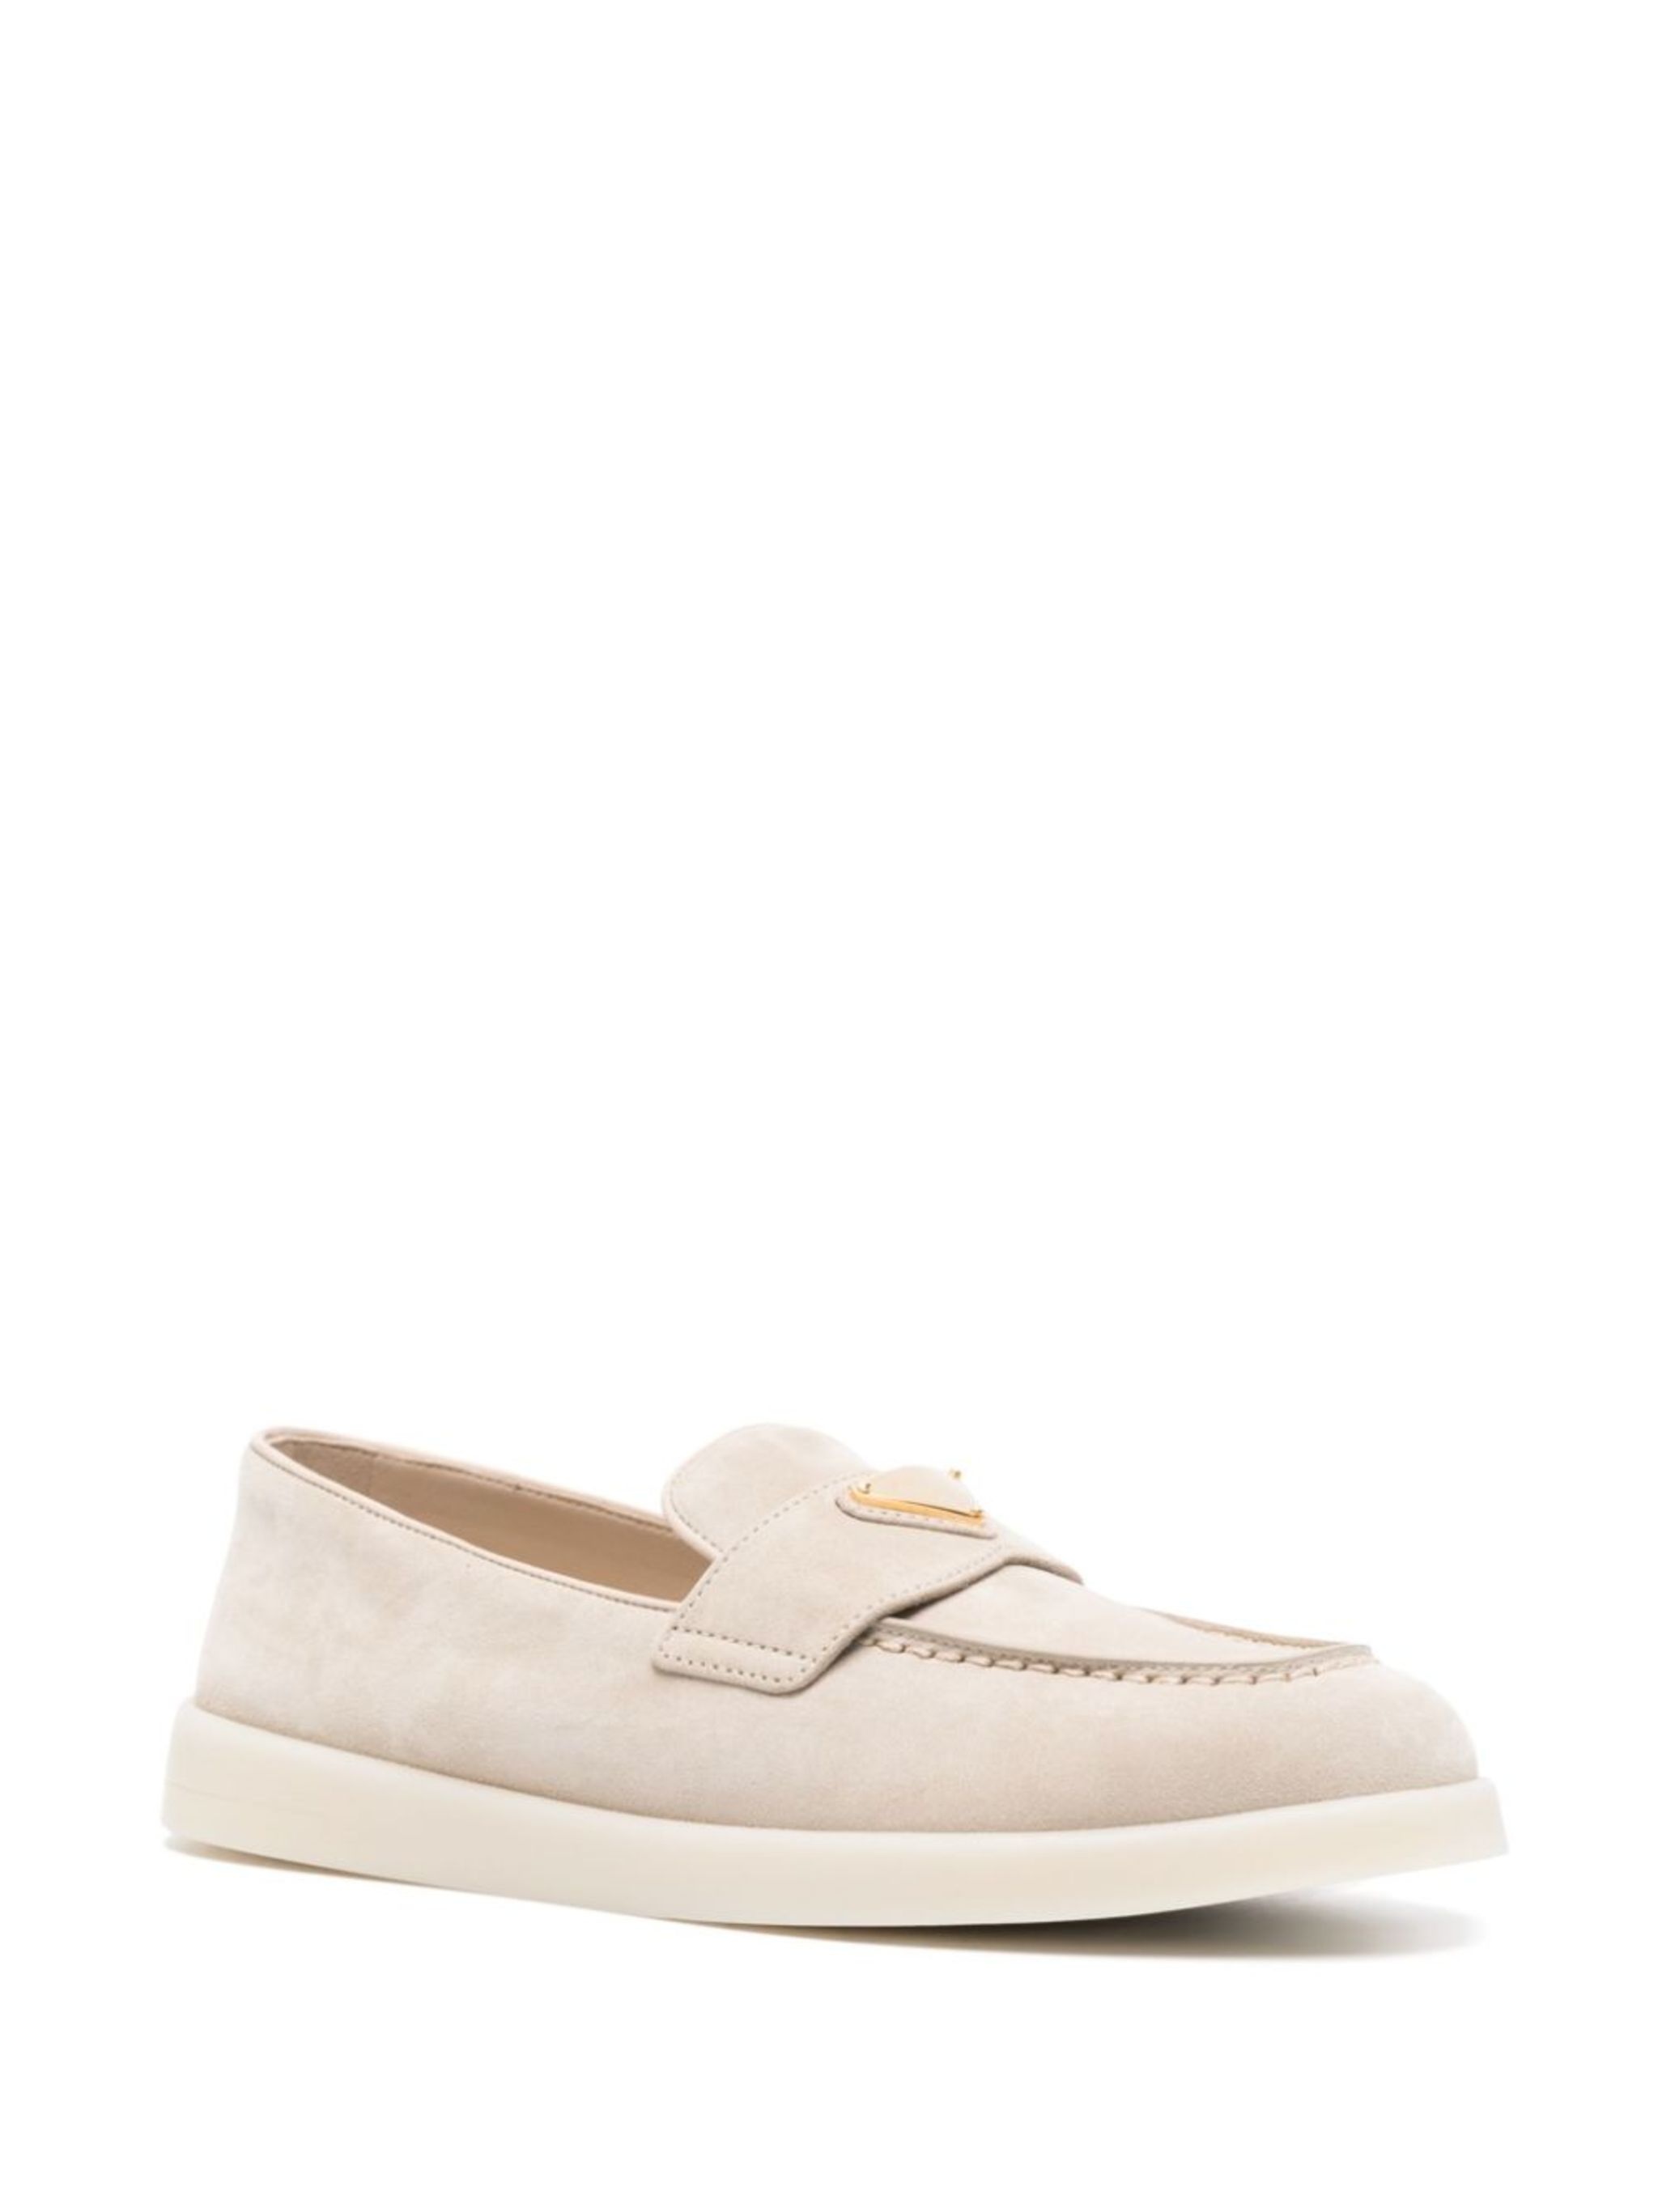 triangle-logo suede loafers - 2